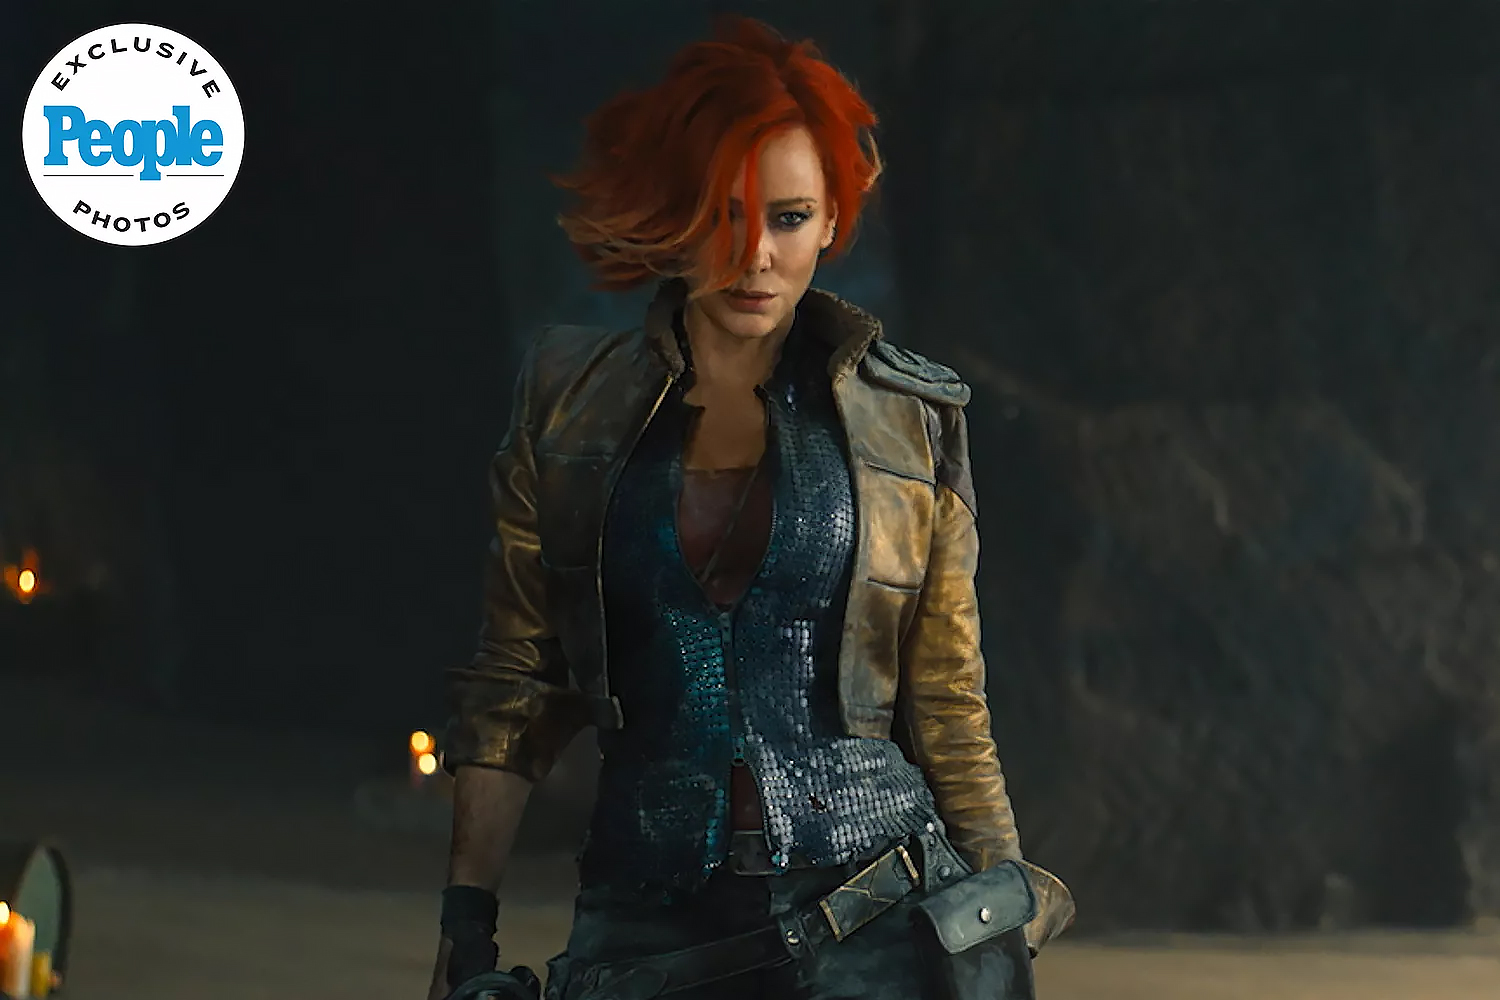 Cate Blanchett will need to save the universe in Borderlands as Lilith.